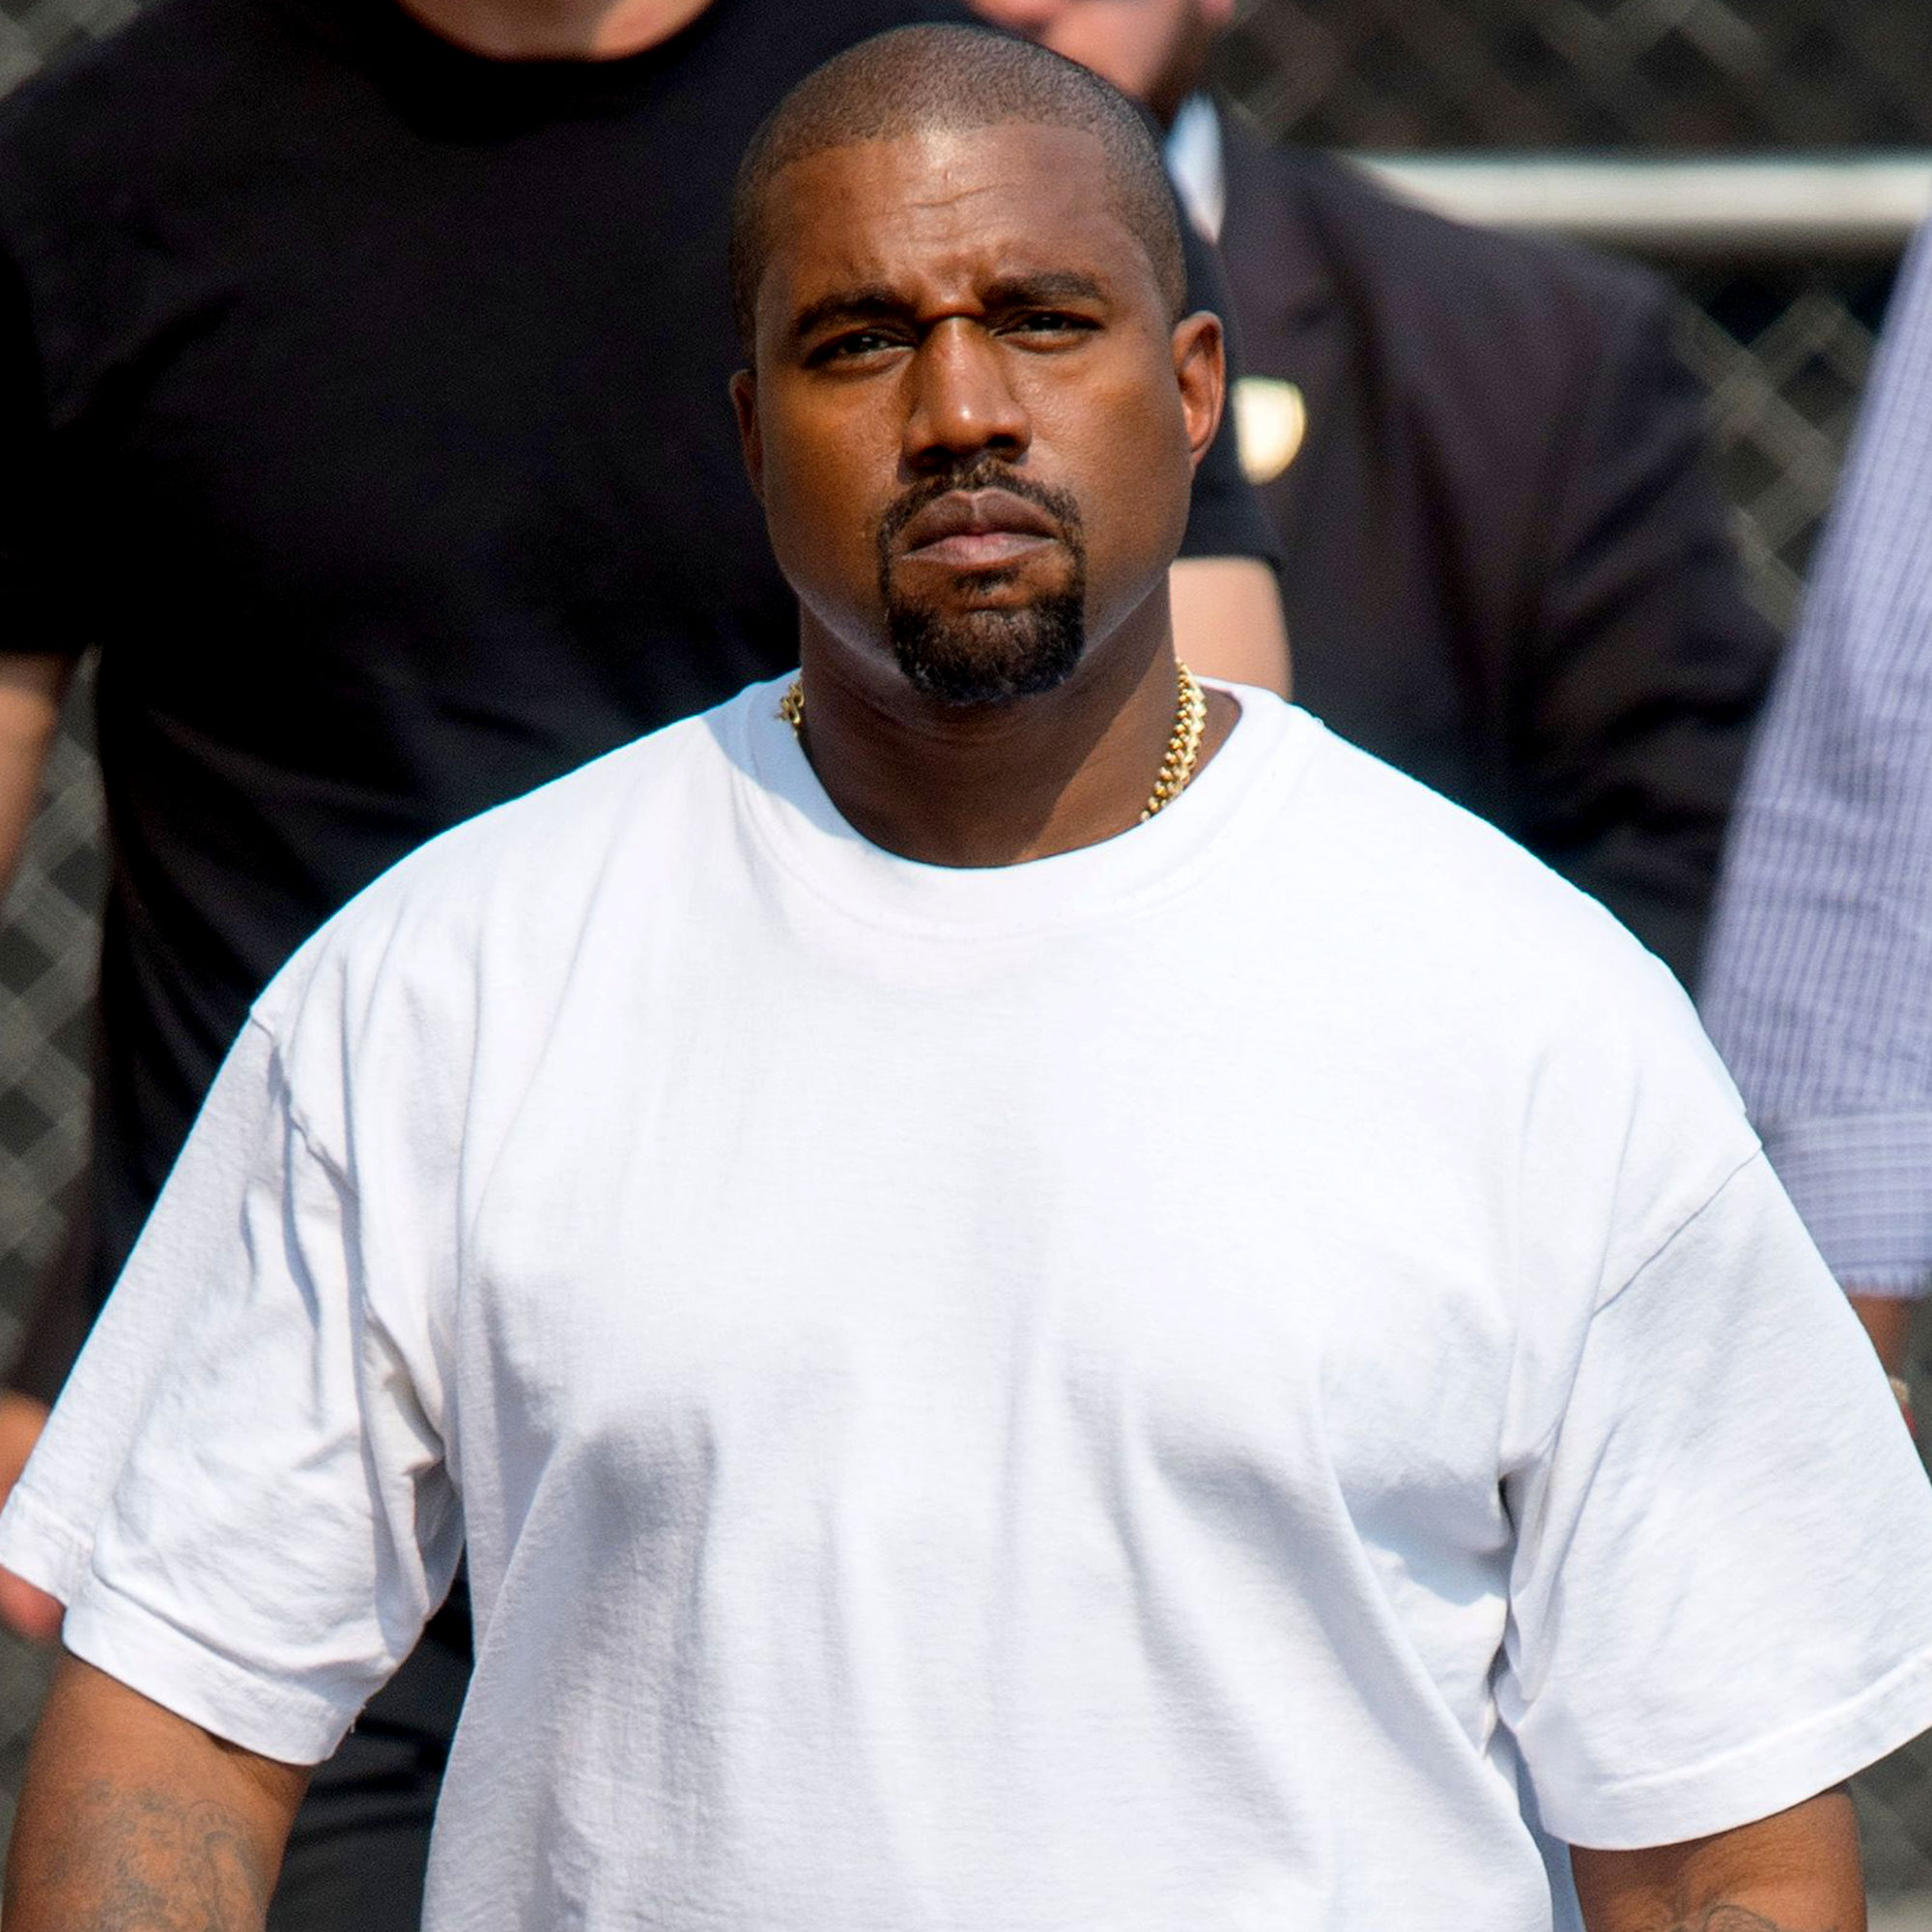 How Much Did Kanye Lose From Adidas?